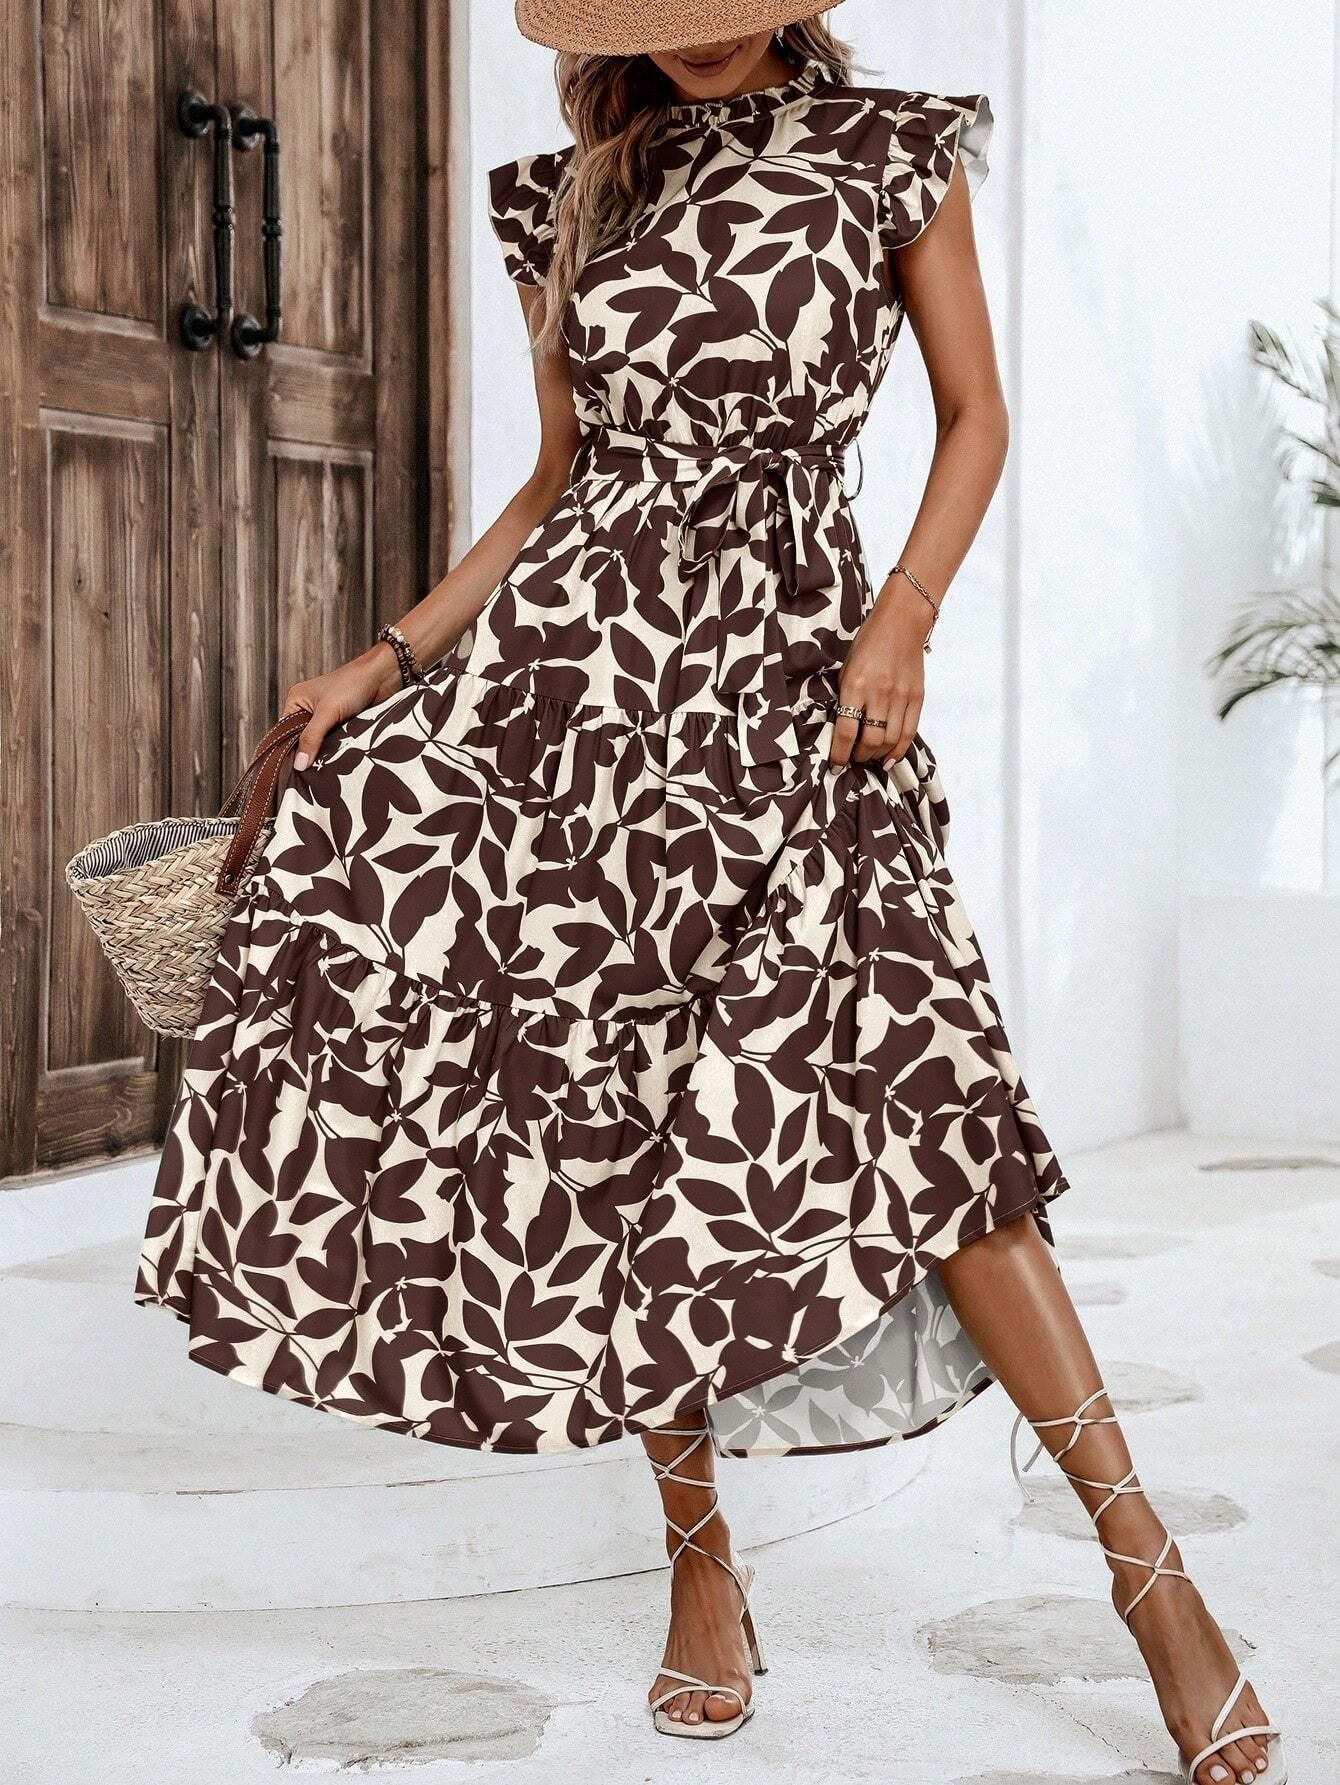 Fashionable Lace Printing Dress with Stringy Selvedge Detail for Women